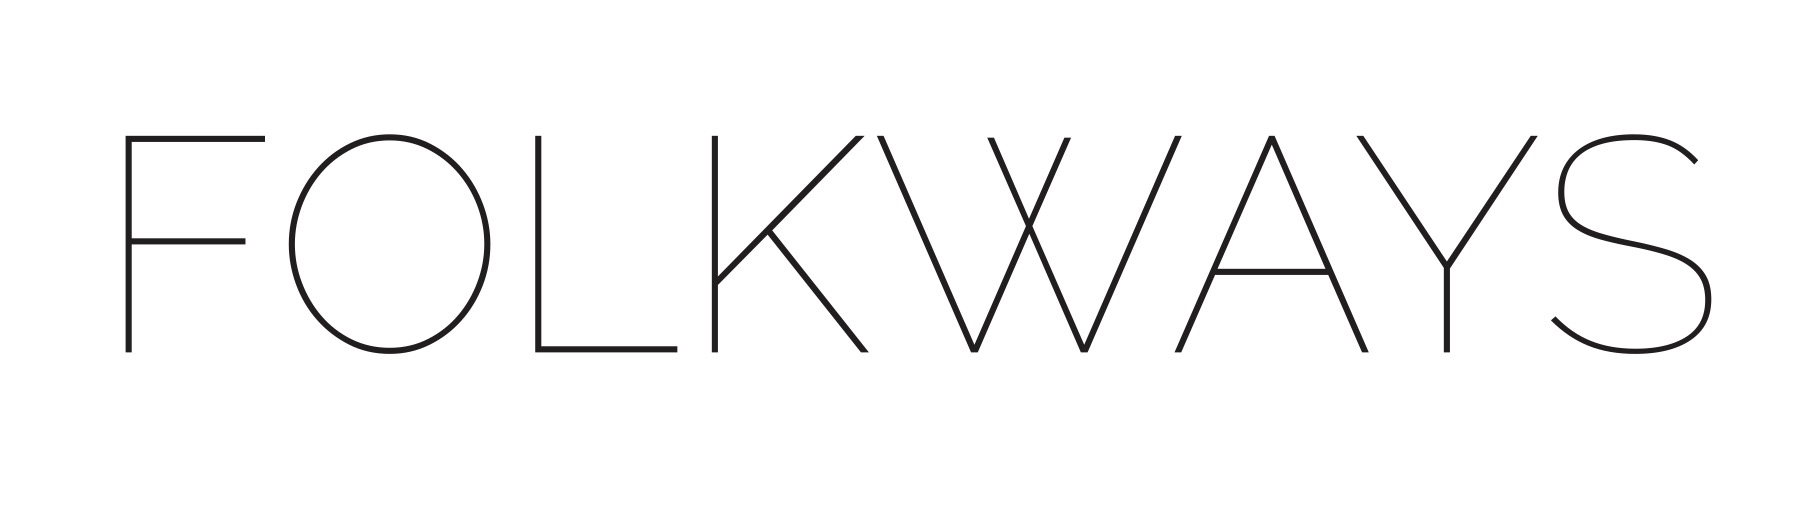 This image shows the logo for Folkways.